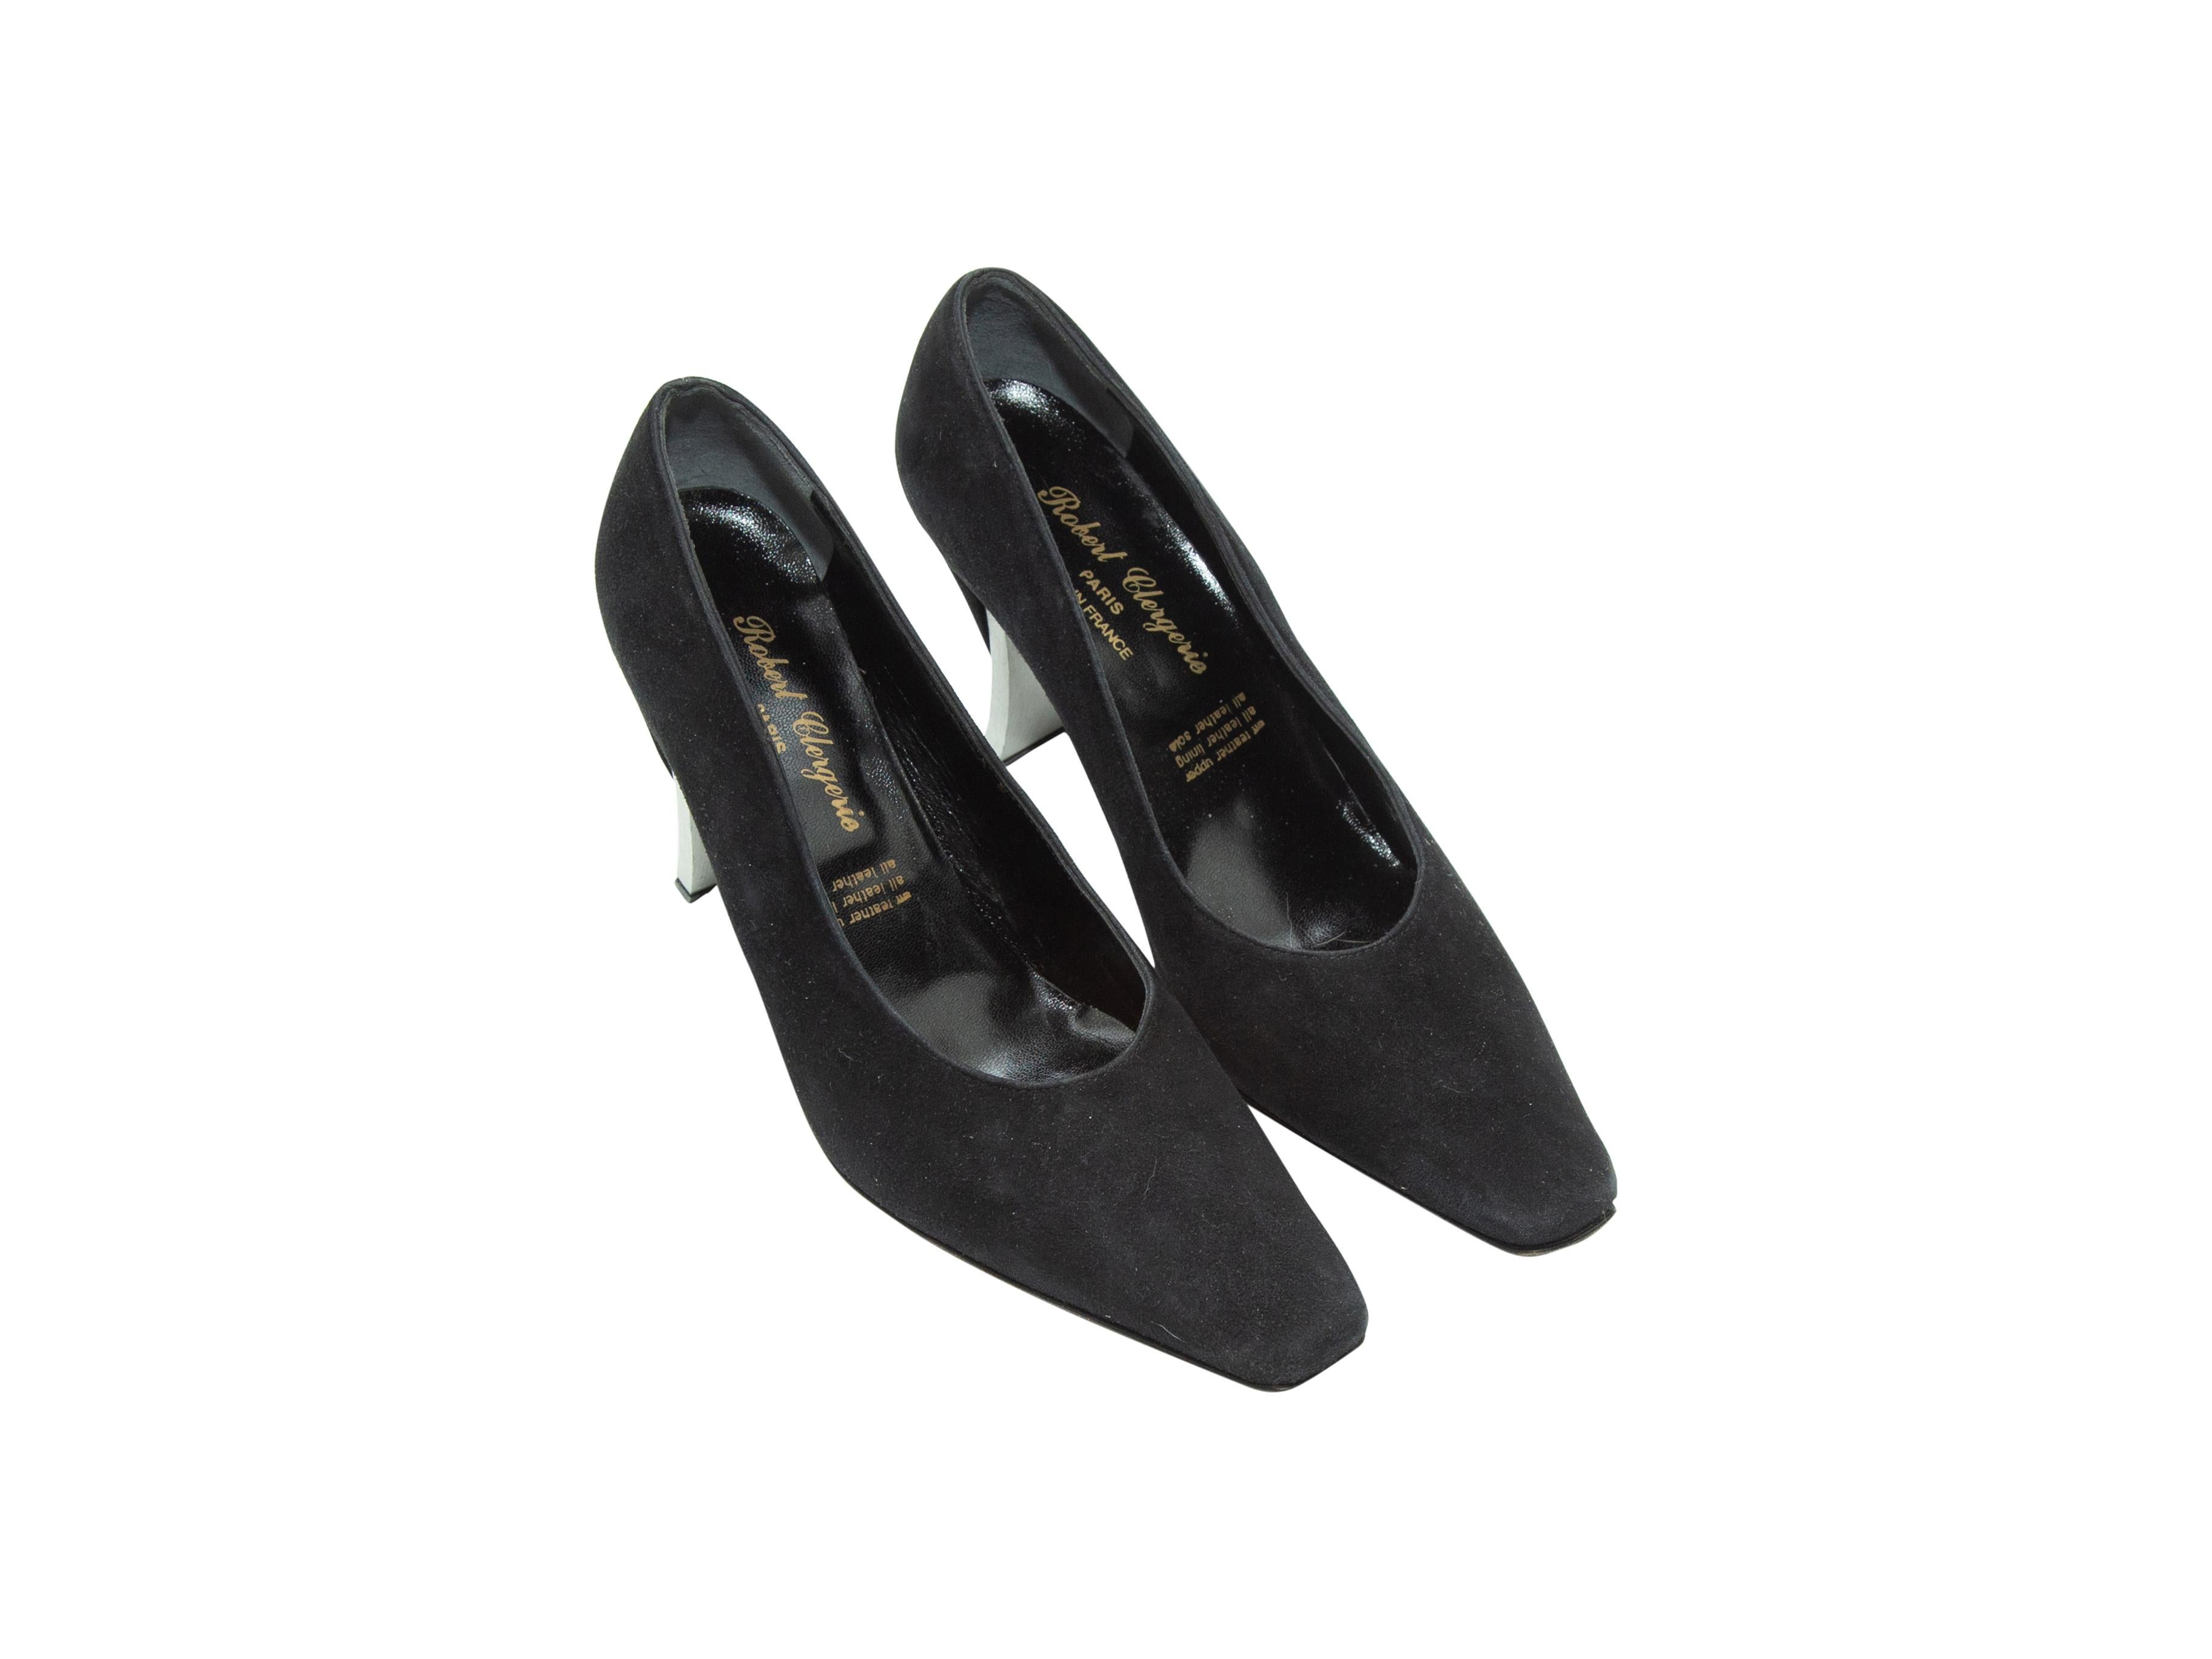 Product details: Black suede pointed-toe pumped by Robert Clergerie. Slip-on style. Silver curved heels. 3